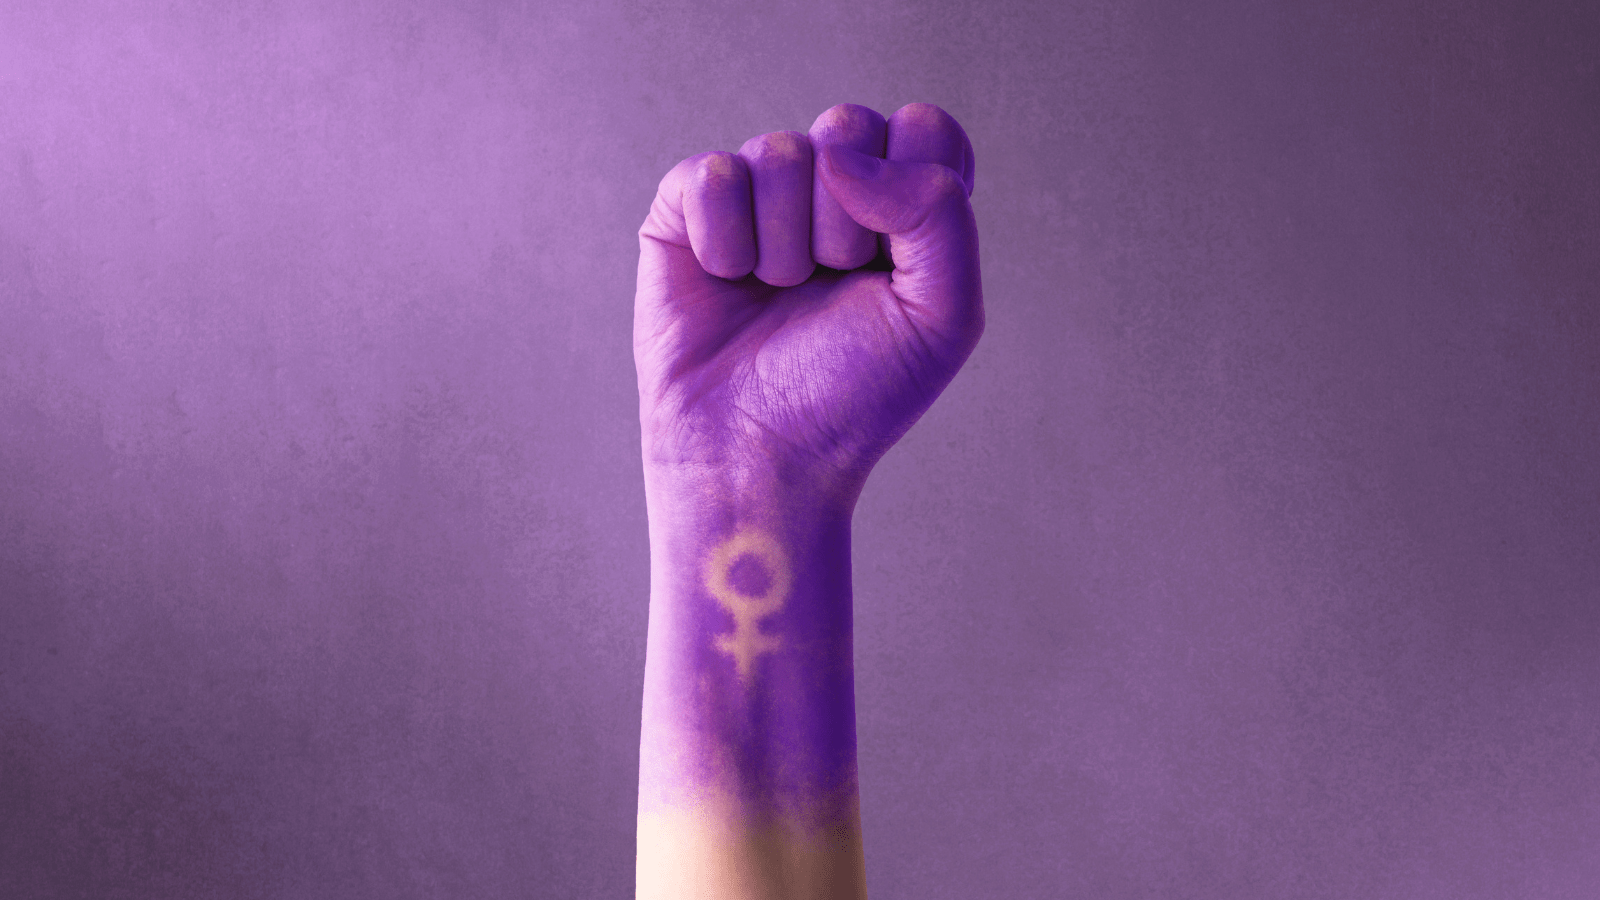  Raised purple fist of a woman for international women's day and the feminist movement. March 8 for feminism, independence, freedom, empowerment, and activism for women rights